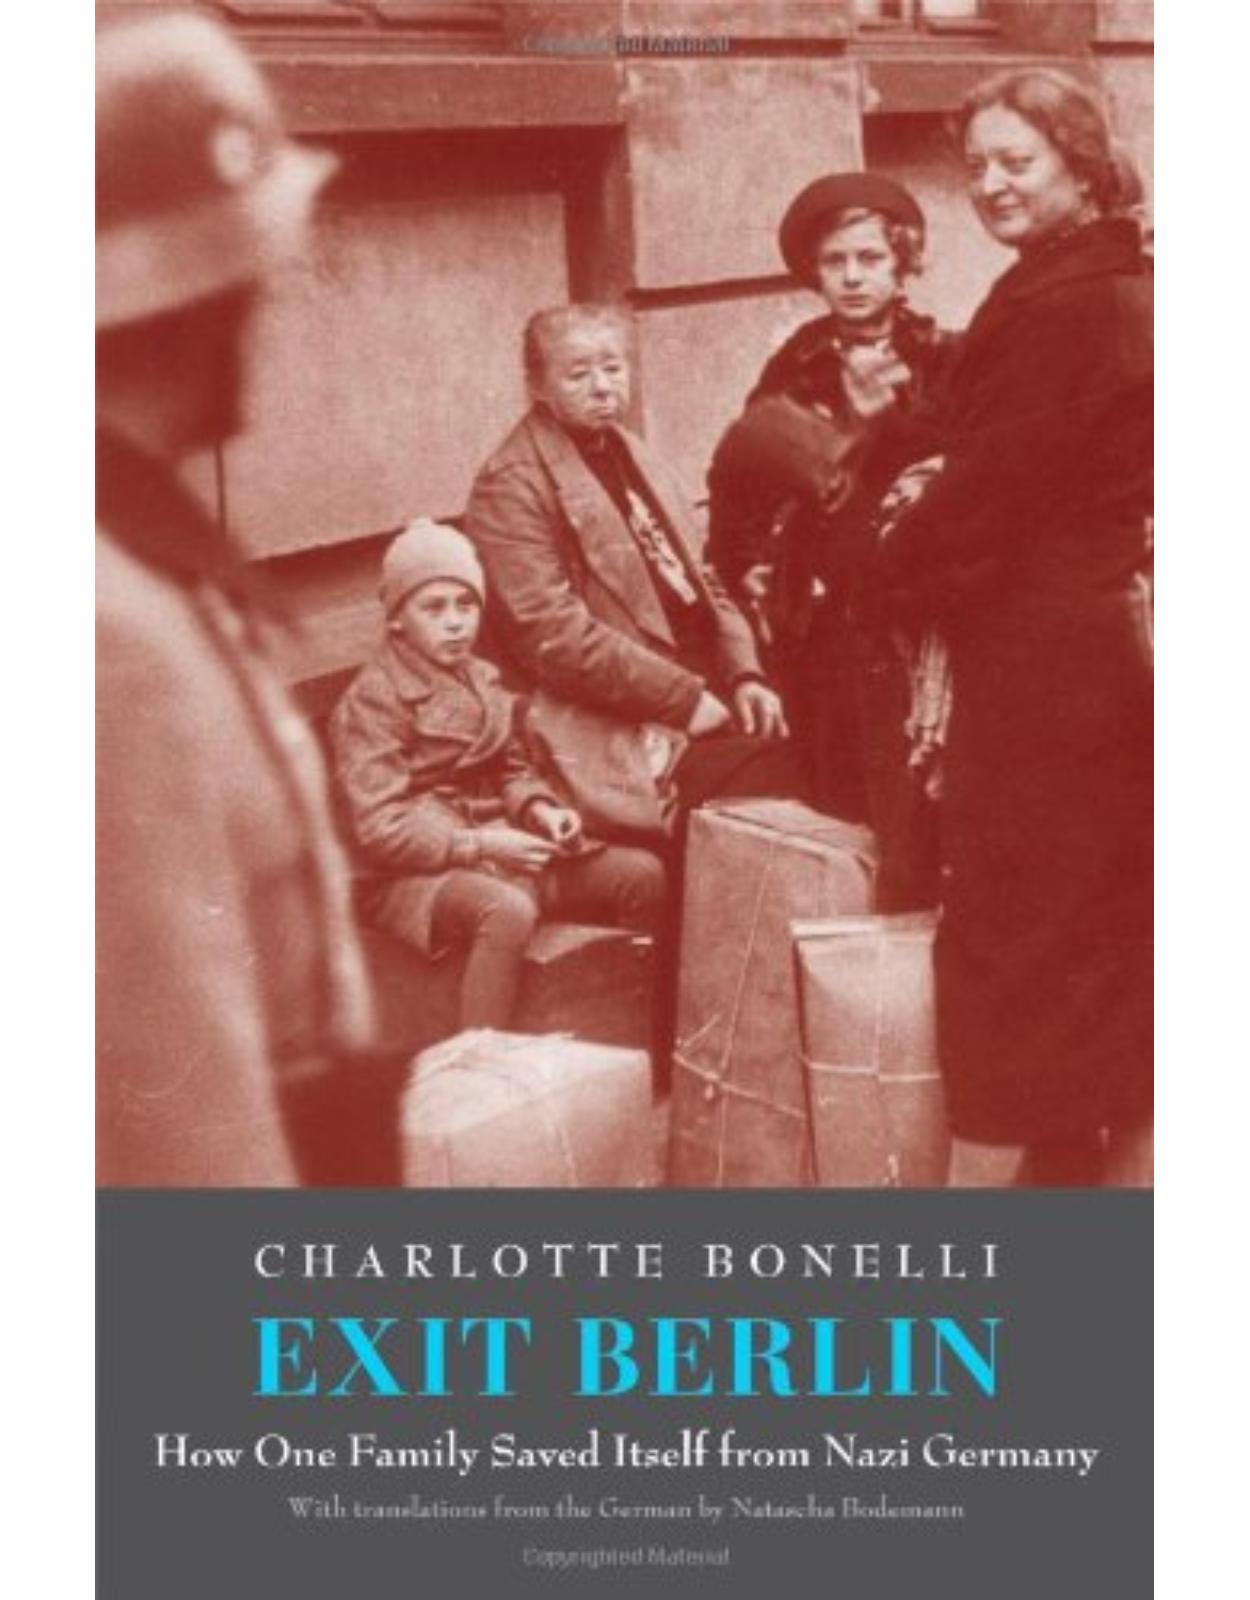 Exit Berlin. How One Family Saved Itself from Nazi Germany